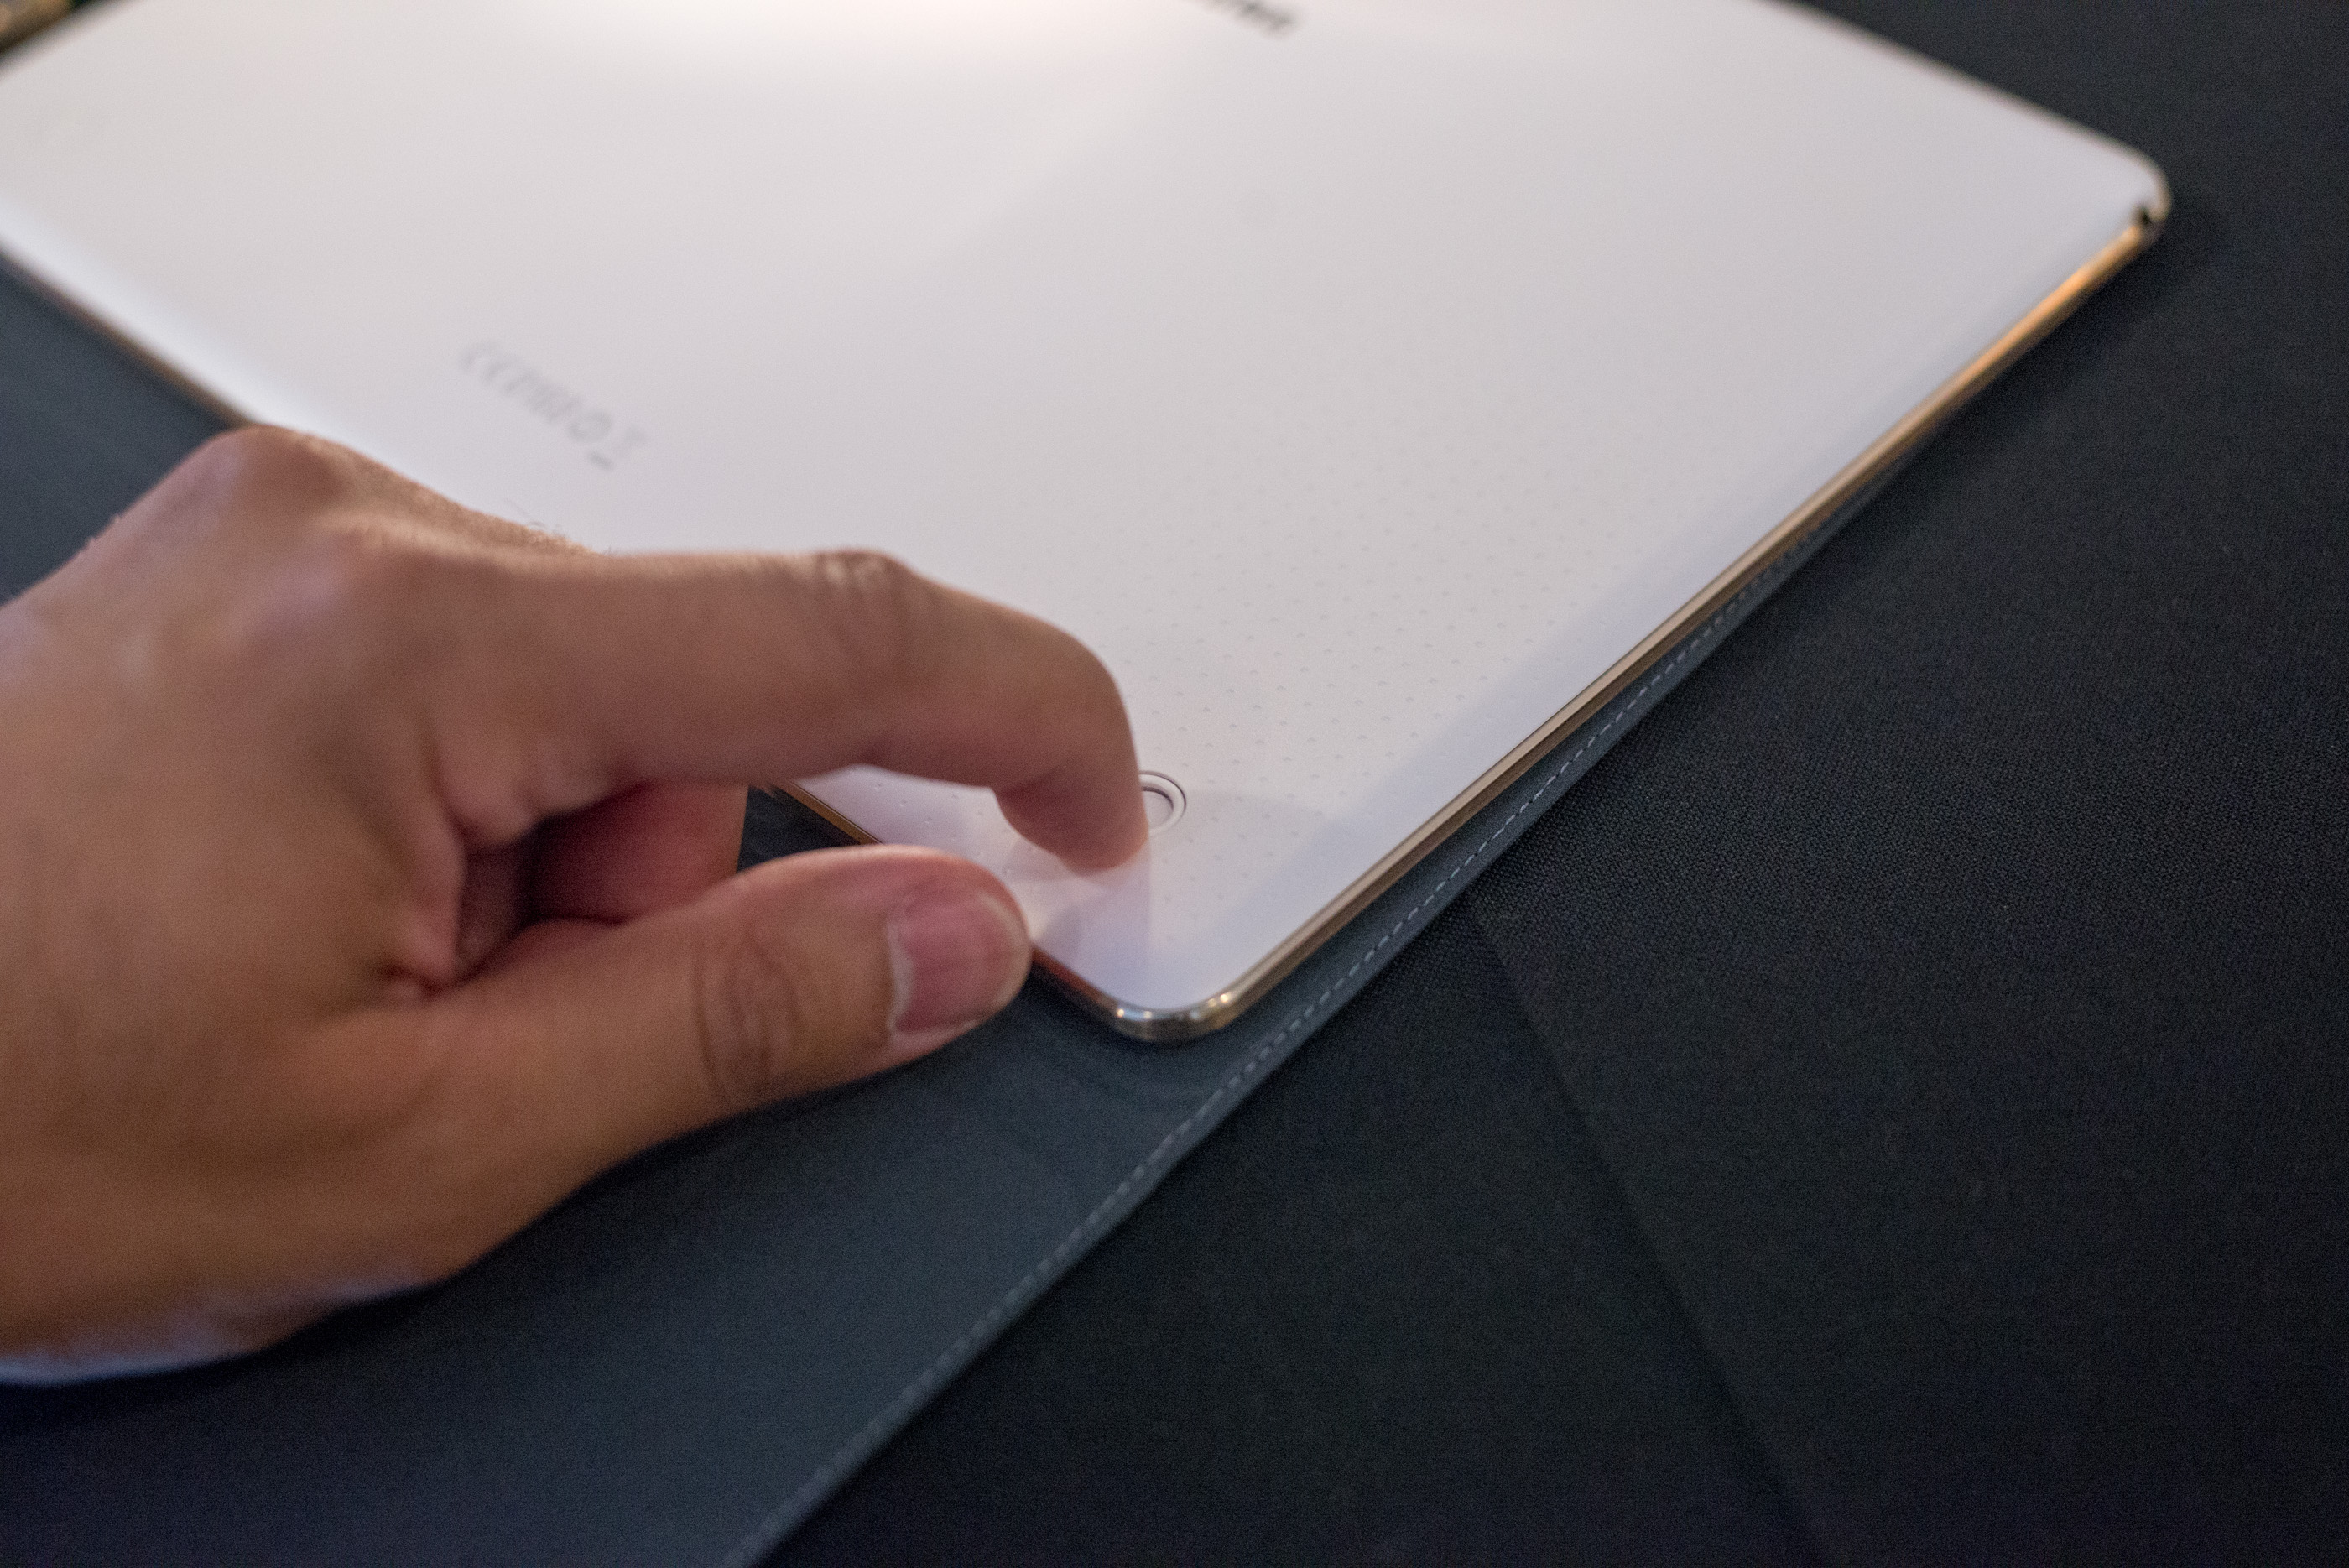 Samsung's Galaxy Tab S 10.5 & 8.4: Hands On with Samsung's 6.6